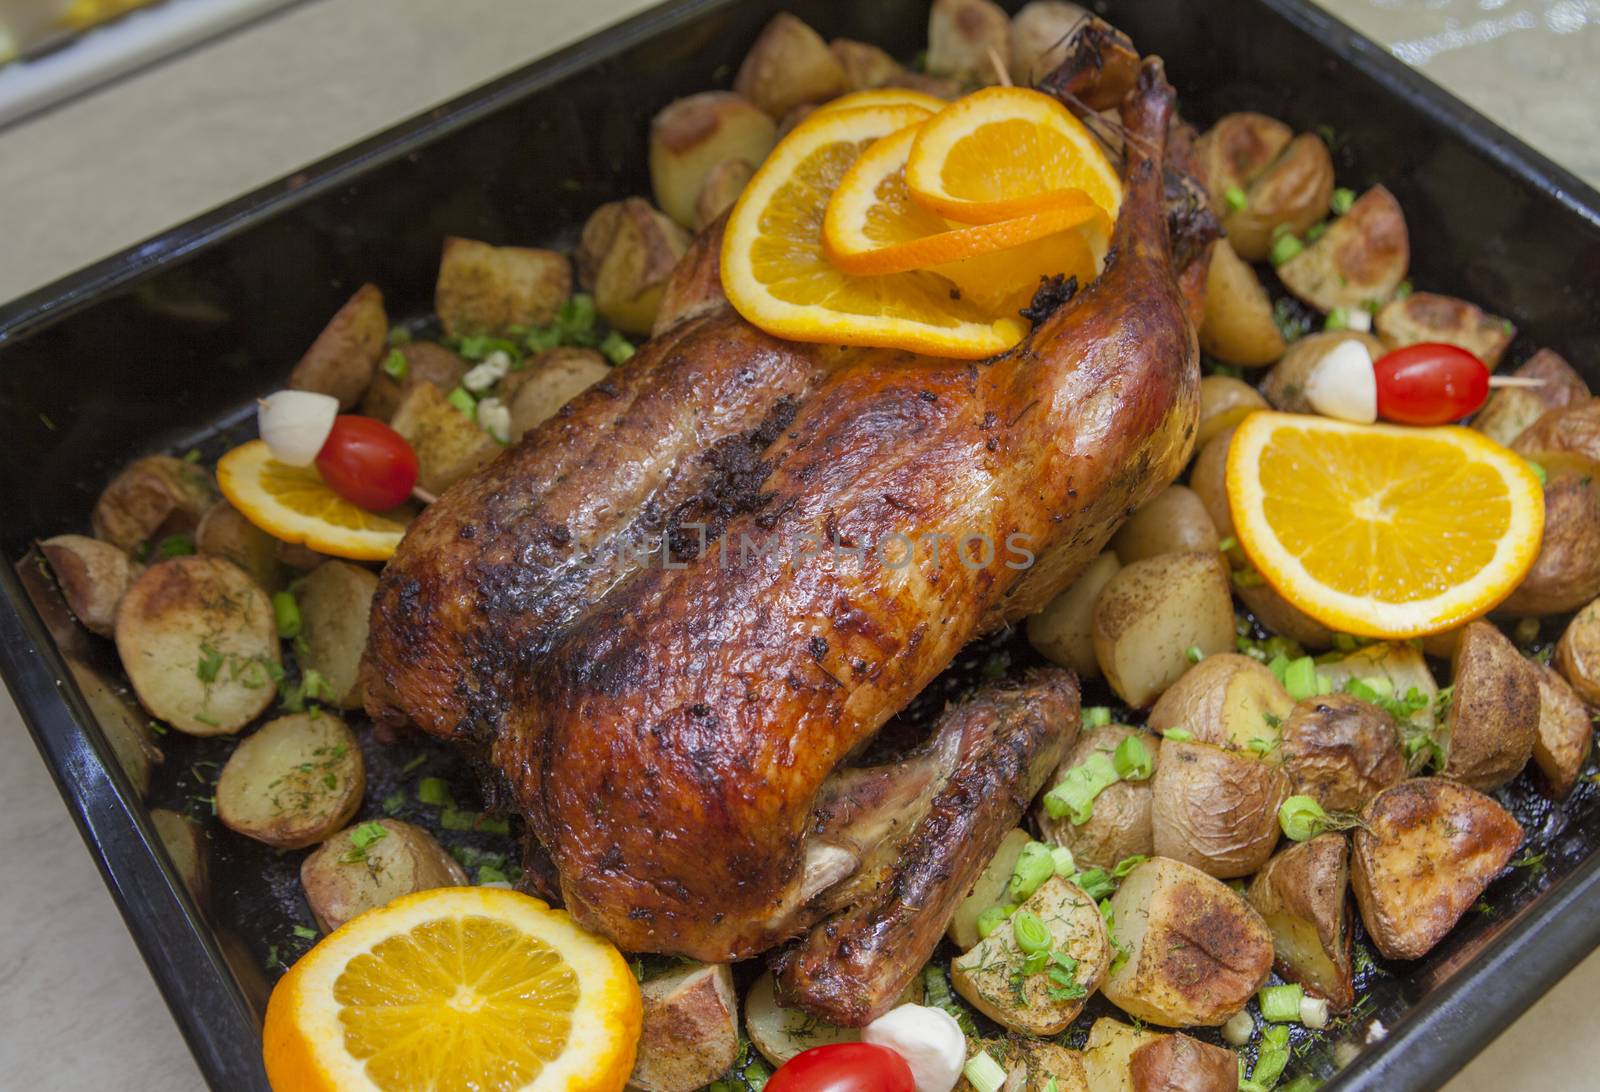 A pan with grilled duck, potatoes, oranges and fresh garlic.